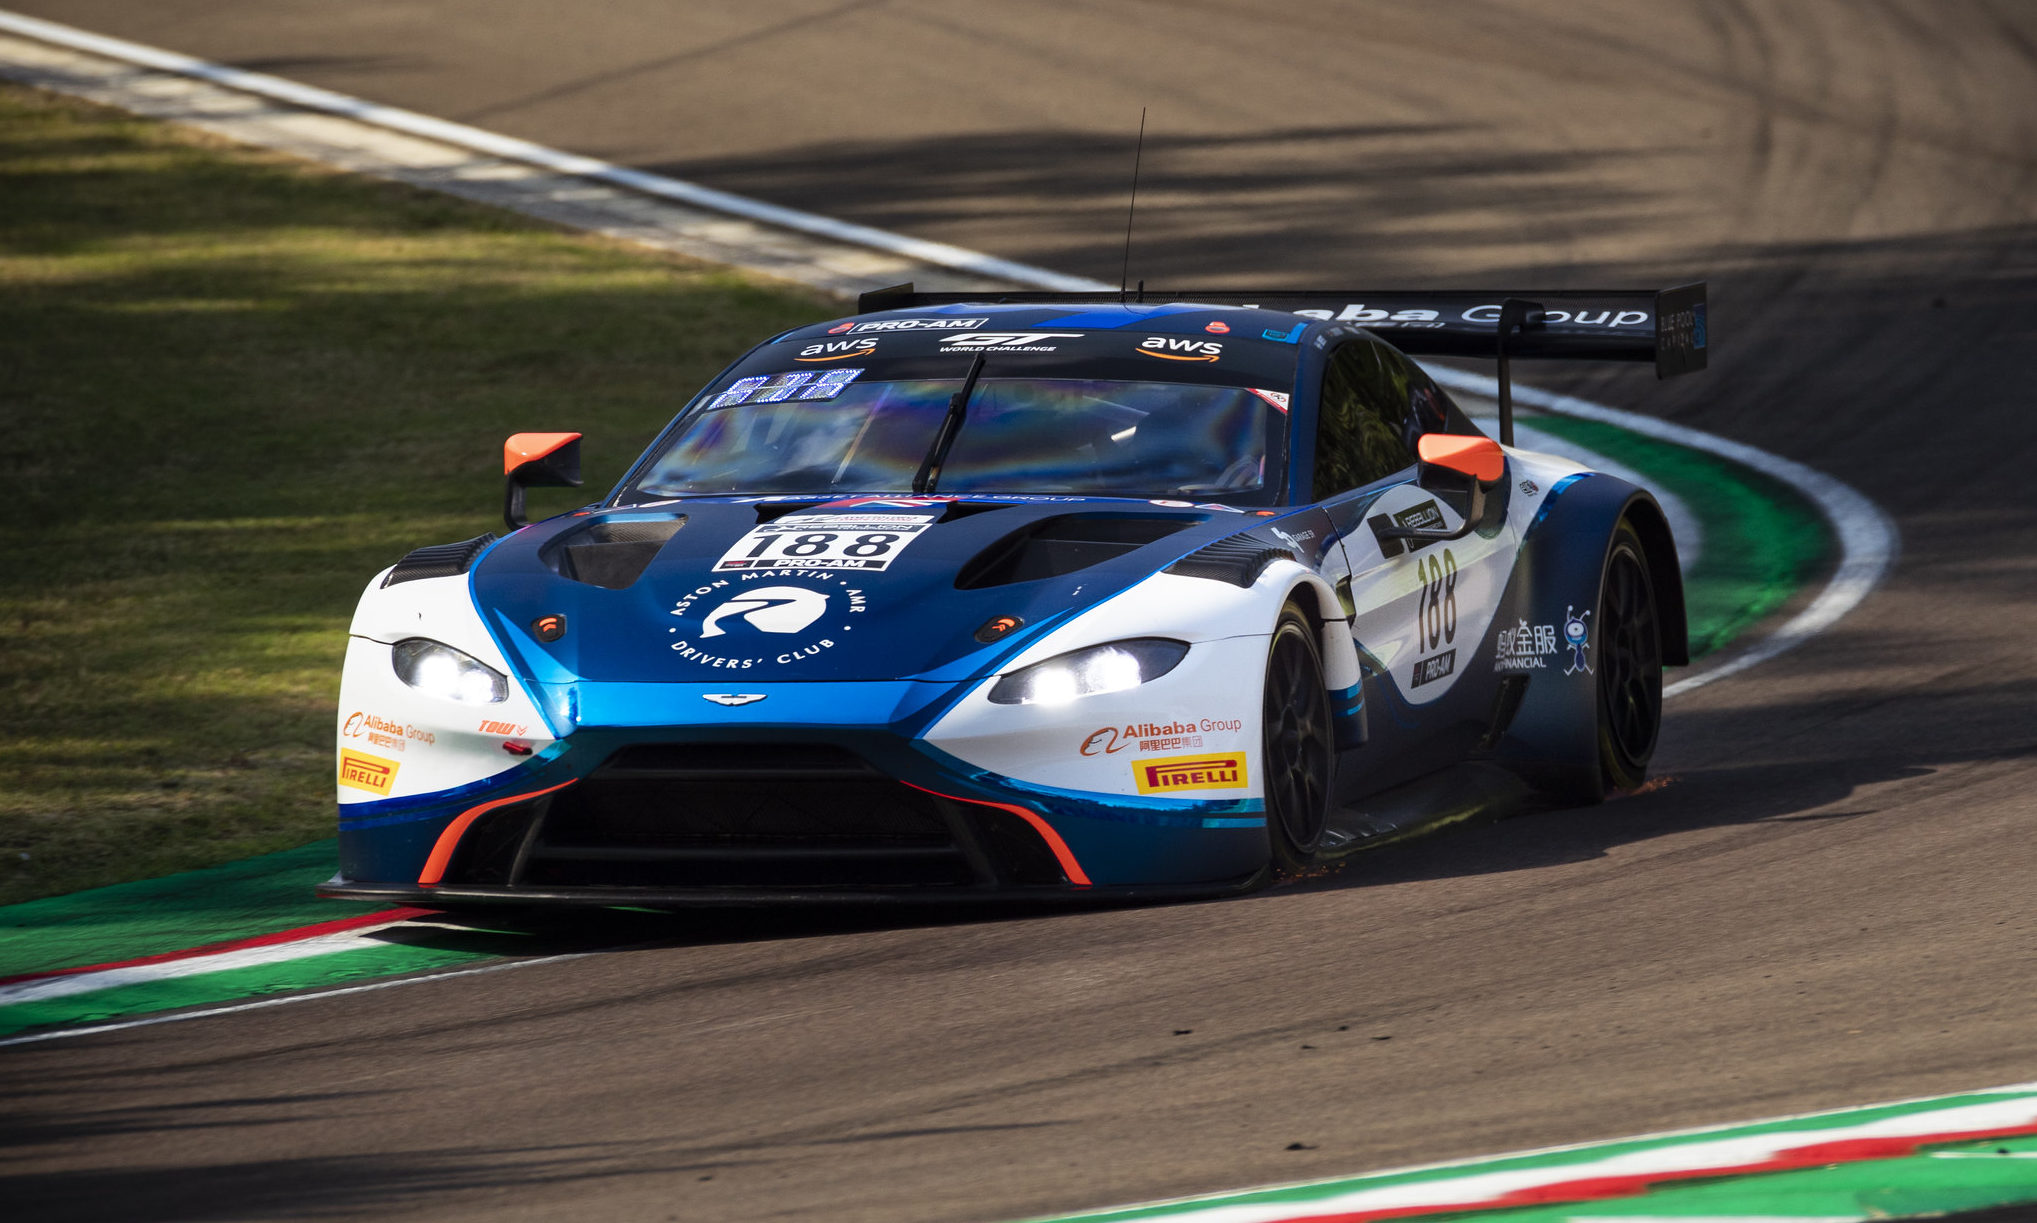 Jonny Adam on his way to victory in the Aston Martin Vantage GT3 at Imola.